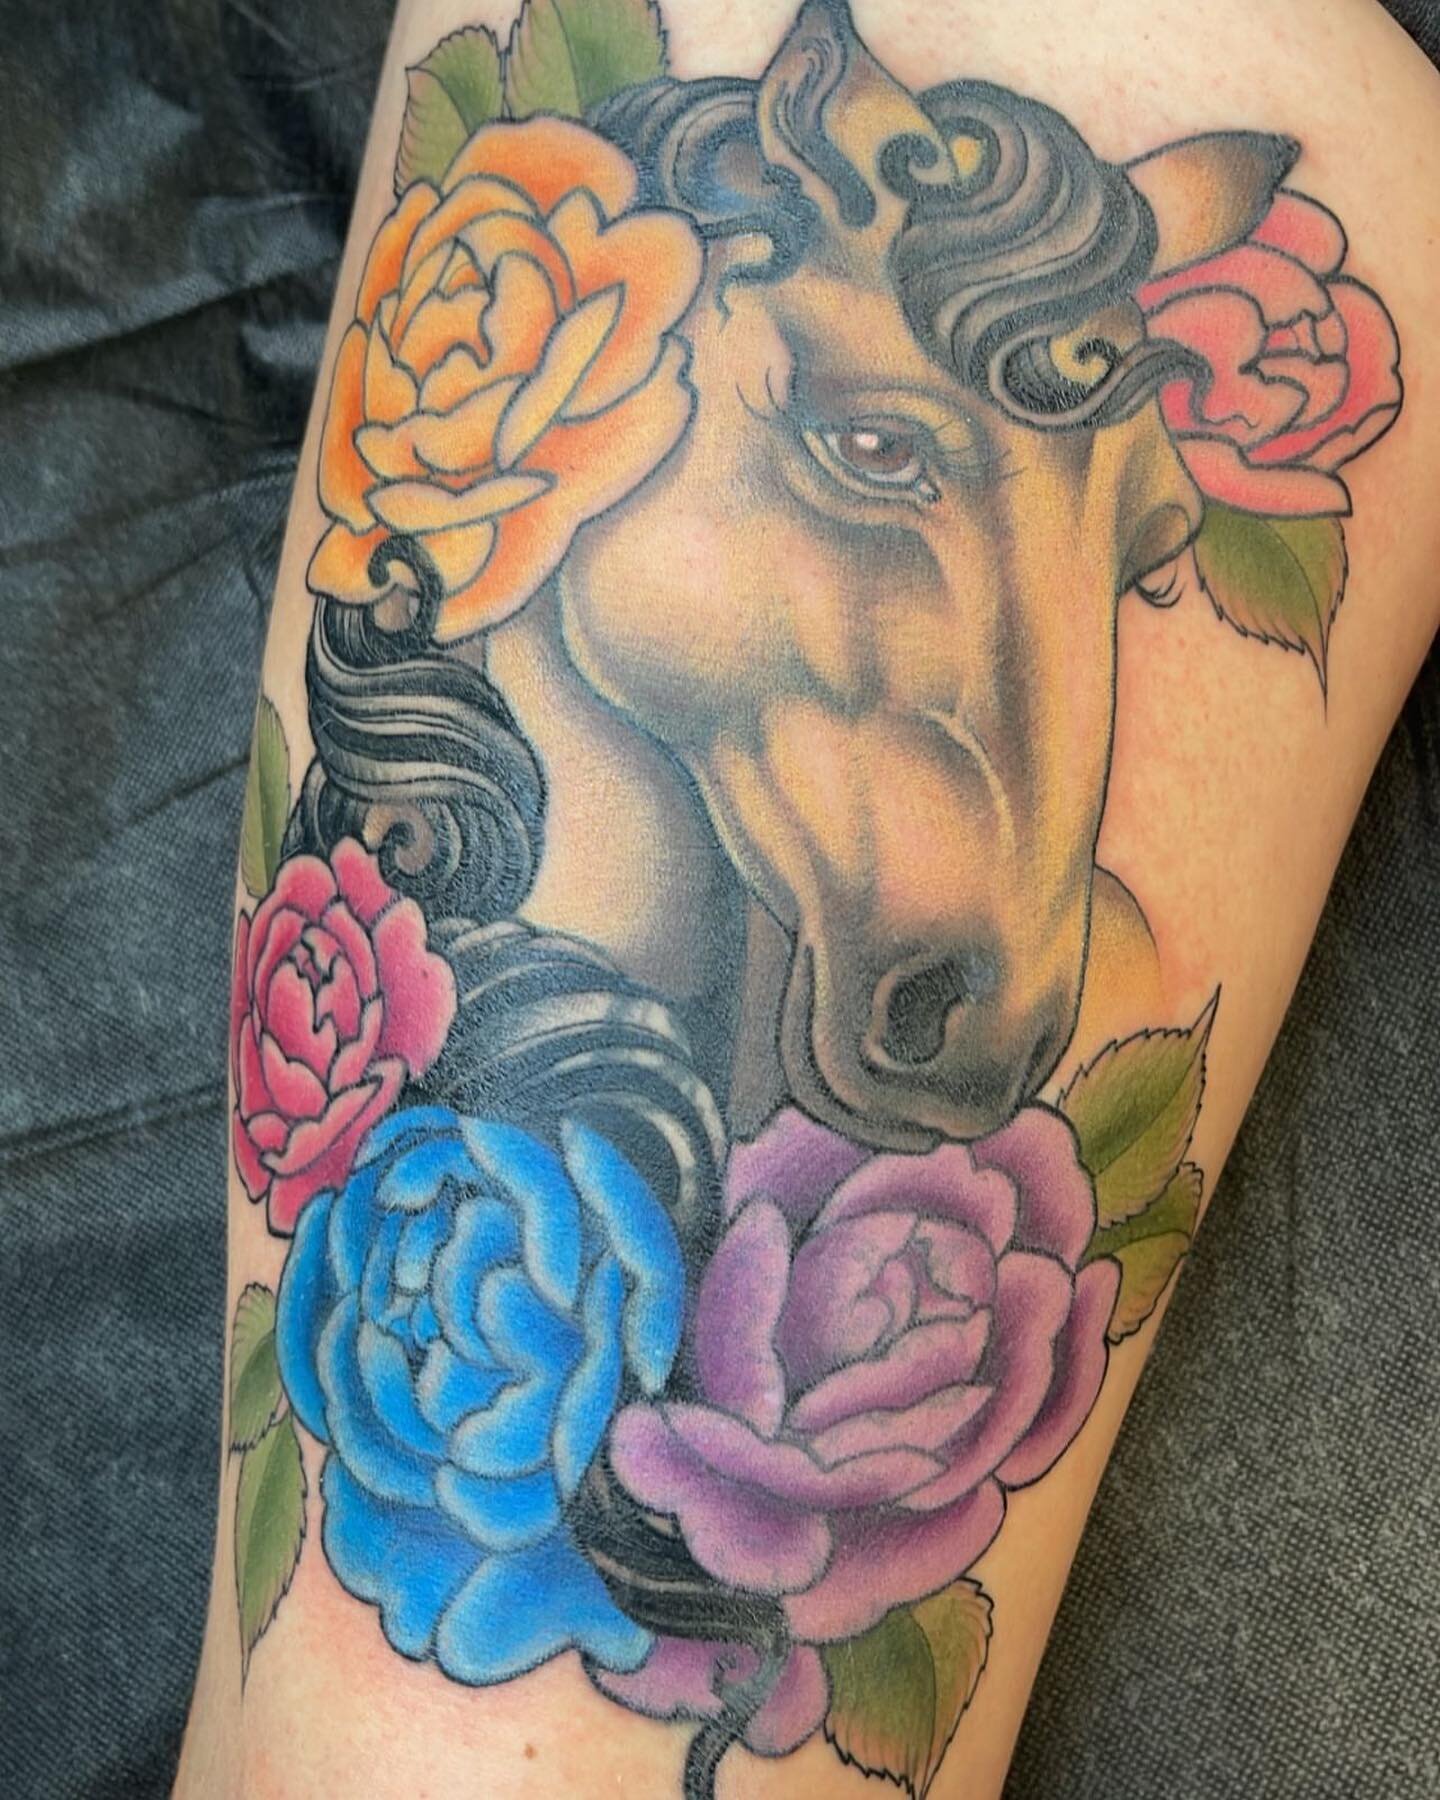 @hollimarieart these colors are amazing!🐎 #horse #flowers #colors #tattoo #flatstattoo